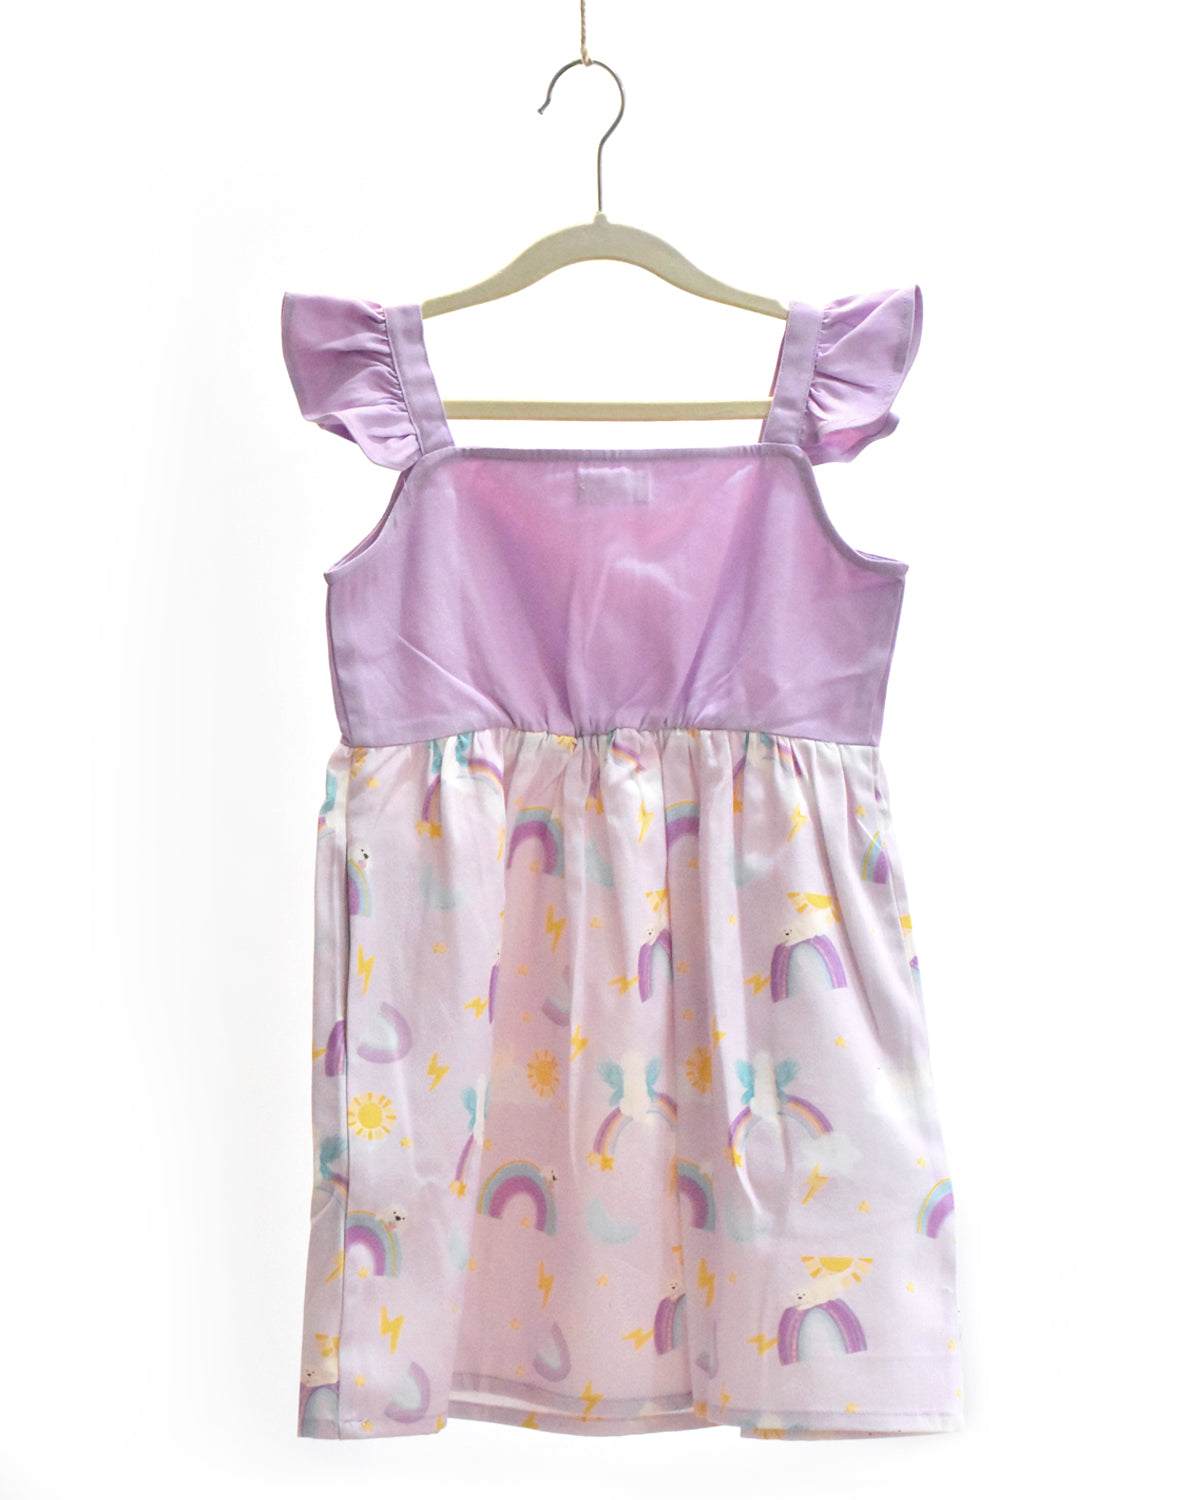 'In the Sky' Lavender Frilly Frock | Rescue